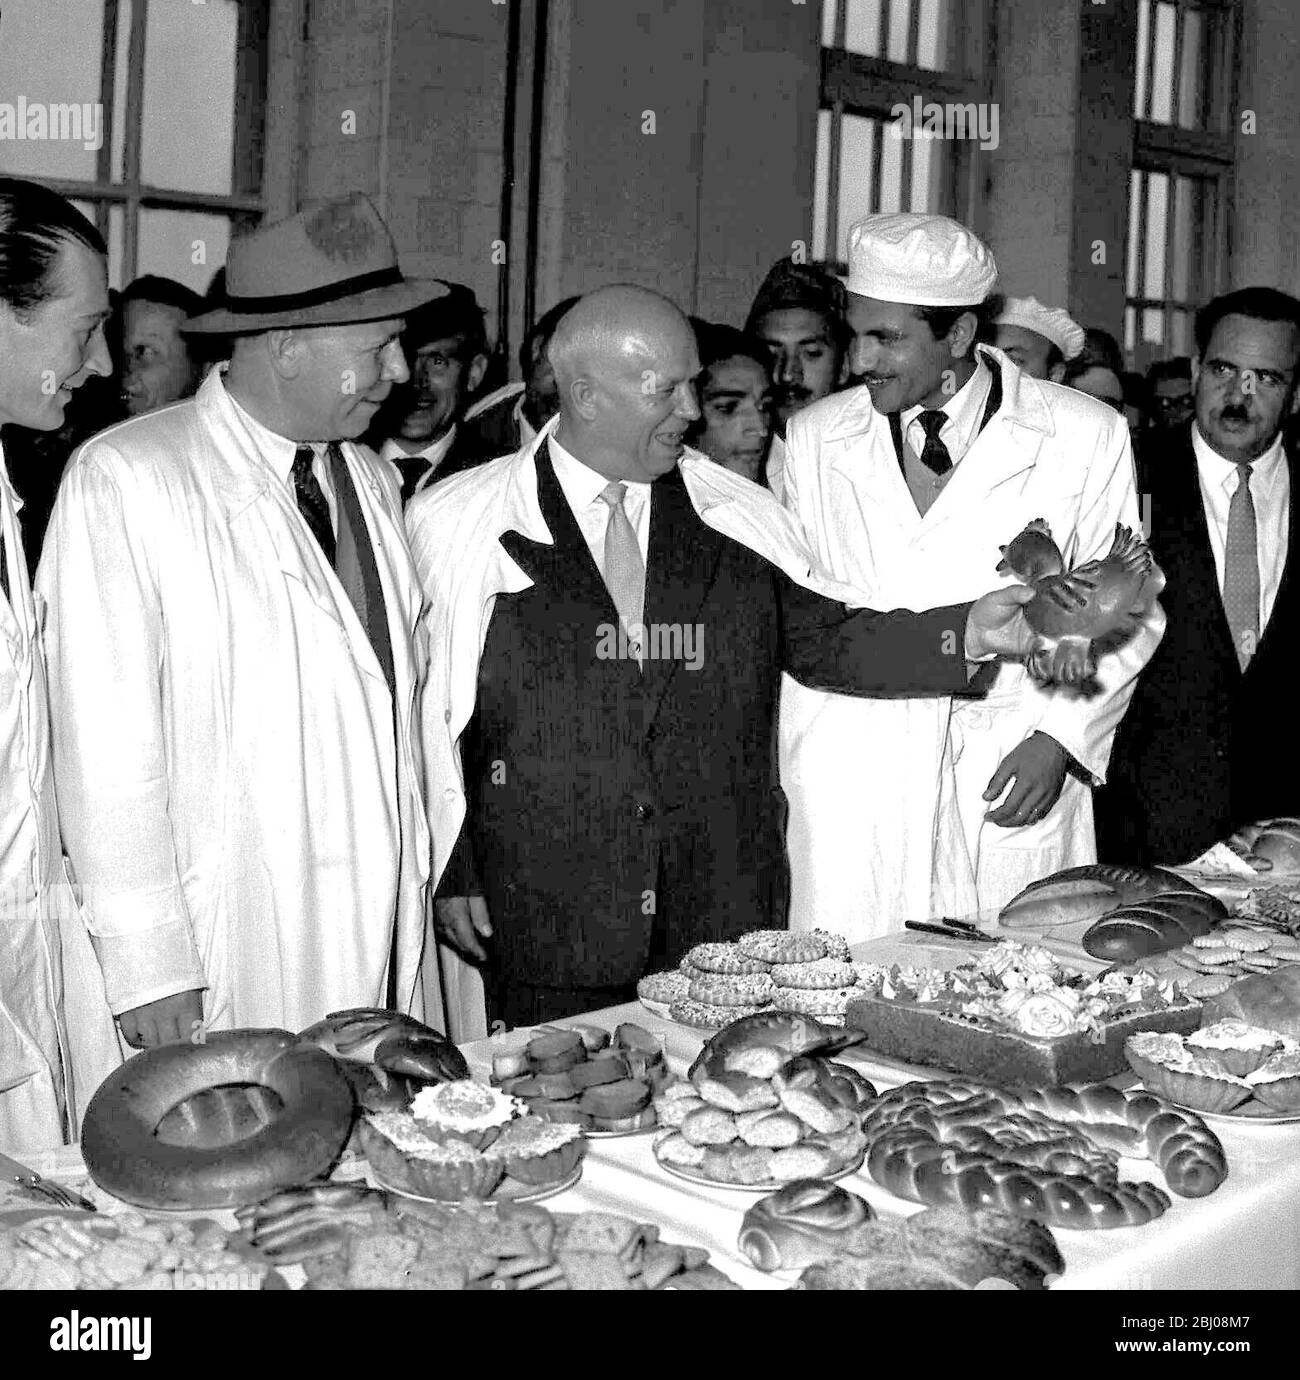 Fancy bread for Khrushchev. Kabul, Afghanistan. Soviet Premier Nikita S Khrushchev chuckles as he holds up a hen-shaped pastry, when he toured Kabul bakery, which was built with Russian aid and technical supervision. The premier was visiting Afghanistan during his tour of Asian countries. 7th March 1960. Stock Photo